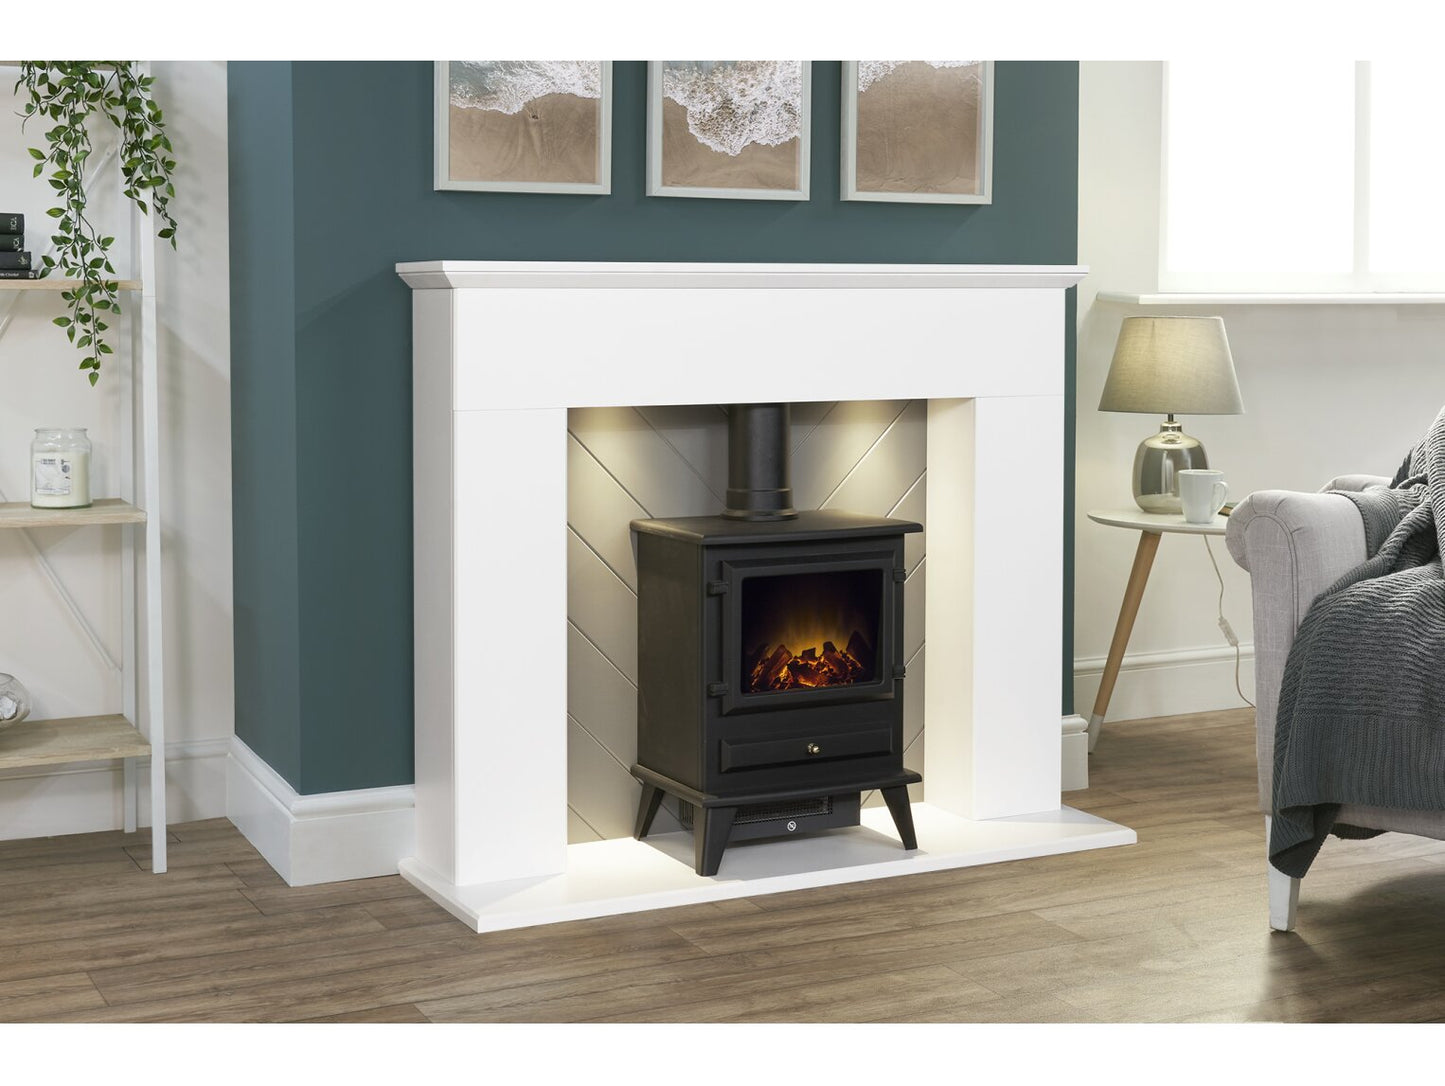 Adam Corinth Stove Fireplace with Downlights & Hudson Electric Stove in Black, 48 Inch 25451 Pure White & Grey